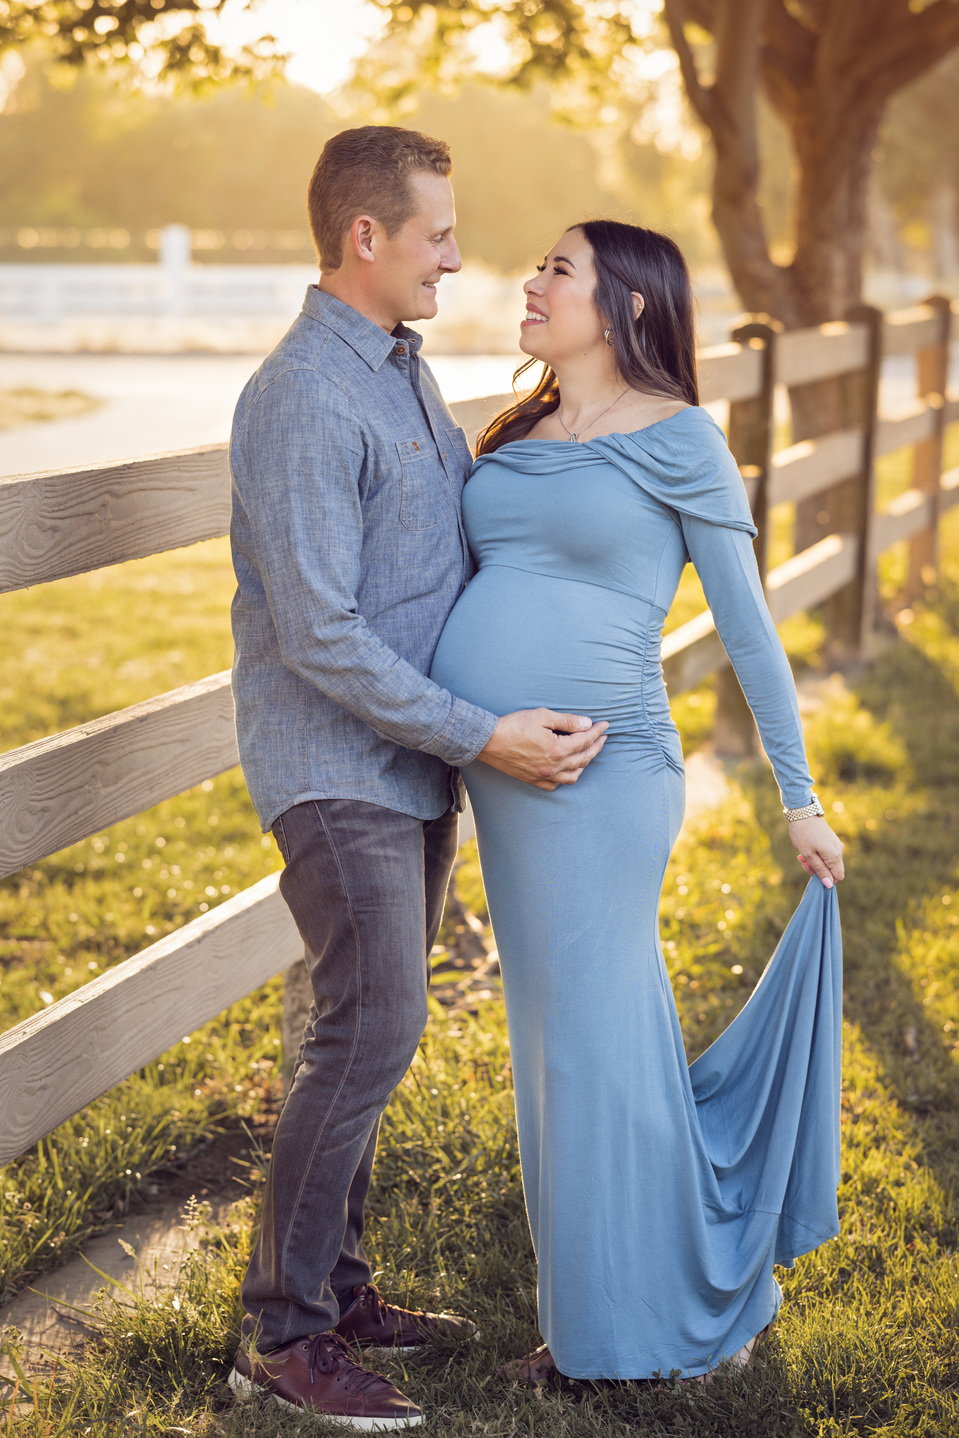 Husband and wife posing for outdoor maternity photoshoot session. Photo is taken at golden hour and the sun is glowing from behind. The couple is standing on the grass in front of a large tree and a wooden fence